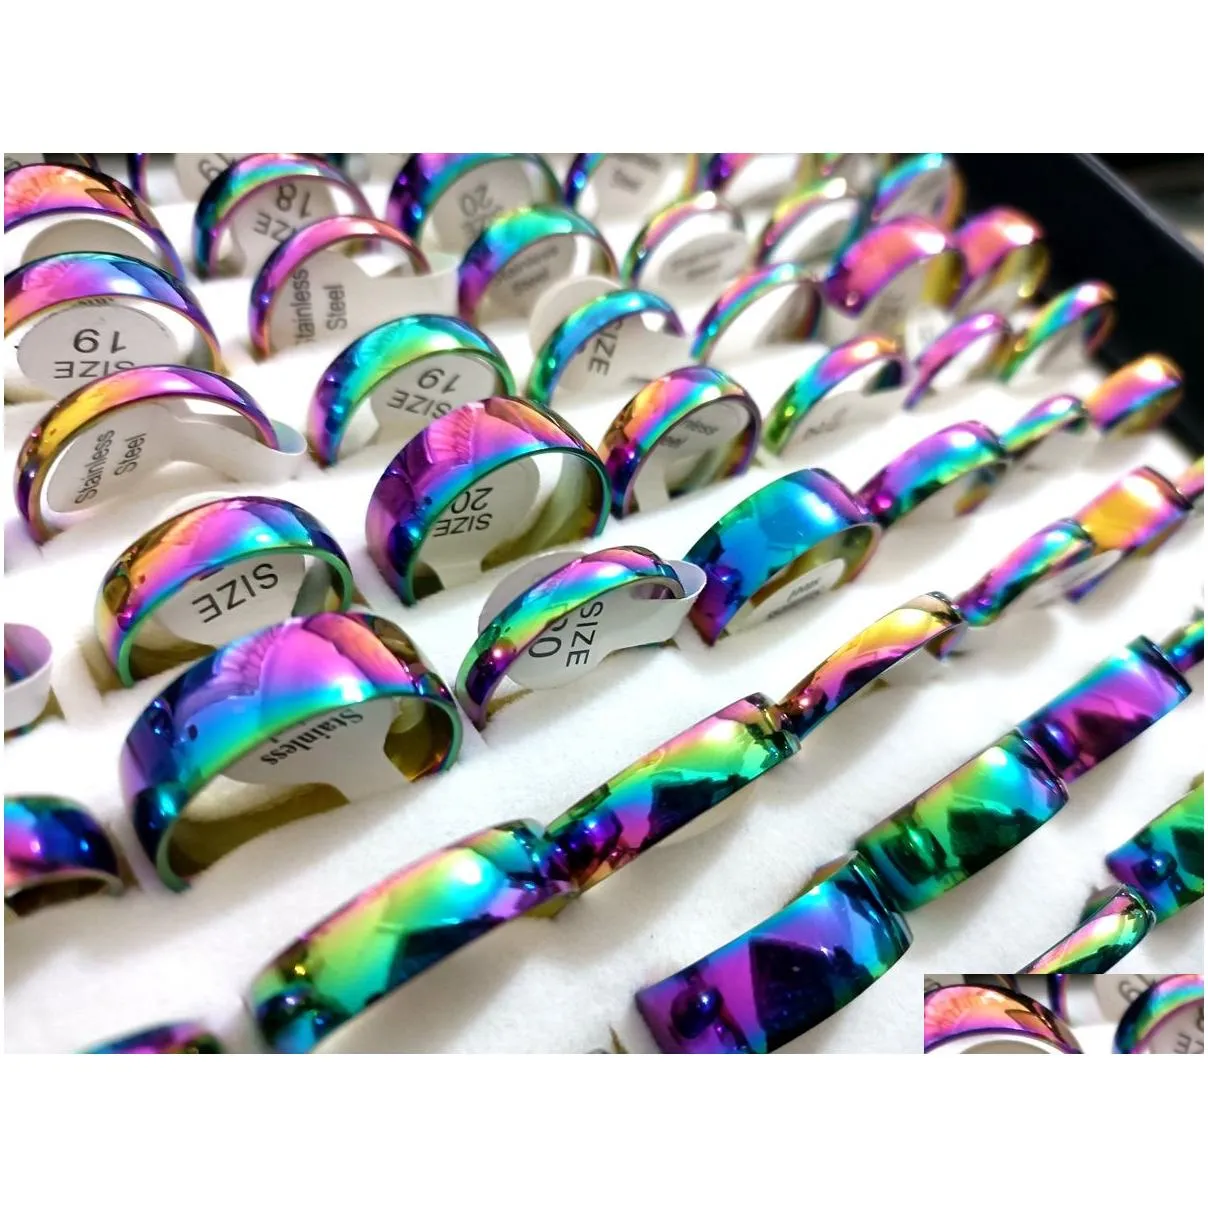 100pcs shiny rainbow color 4 6 8mm band comfort-fit quality men women stainless steel wedding rings wholesale trendy jewelry bulk lot